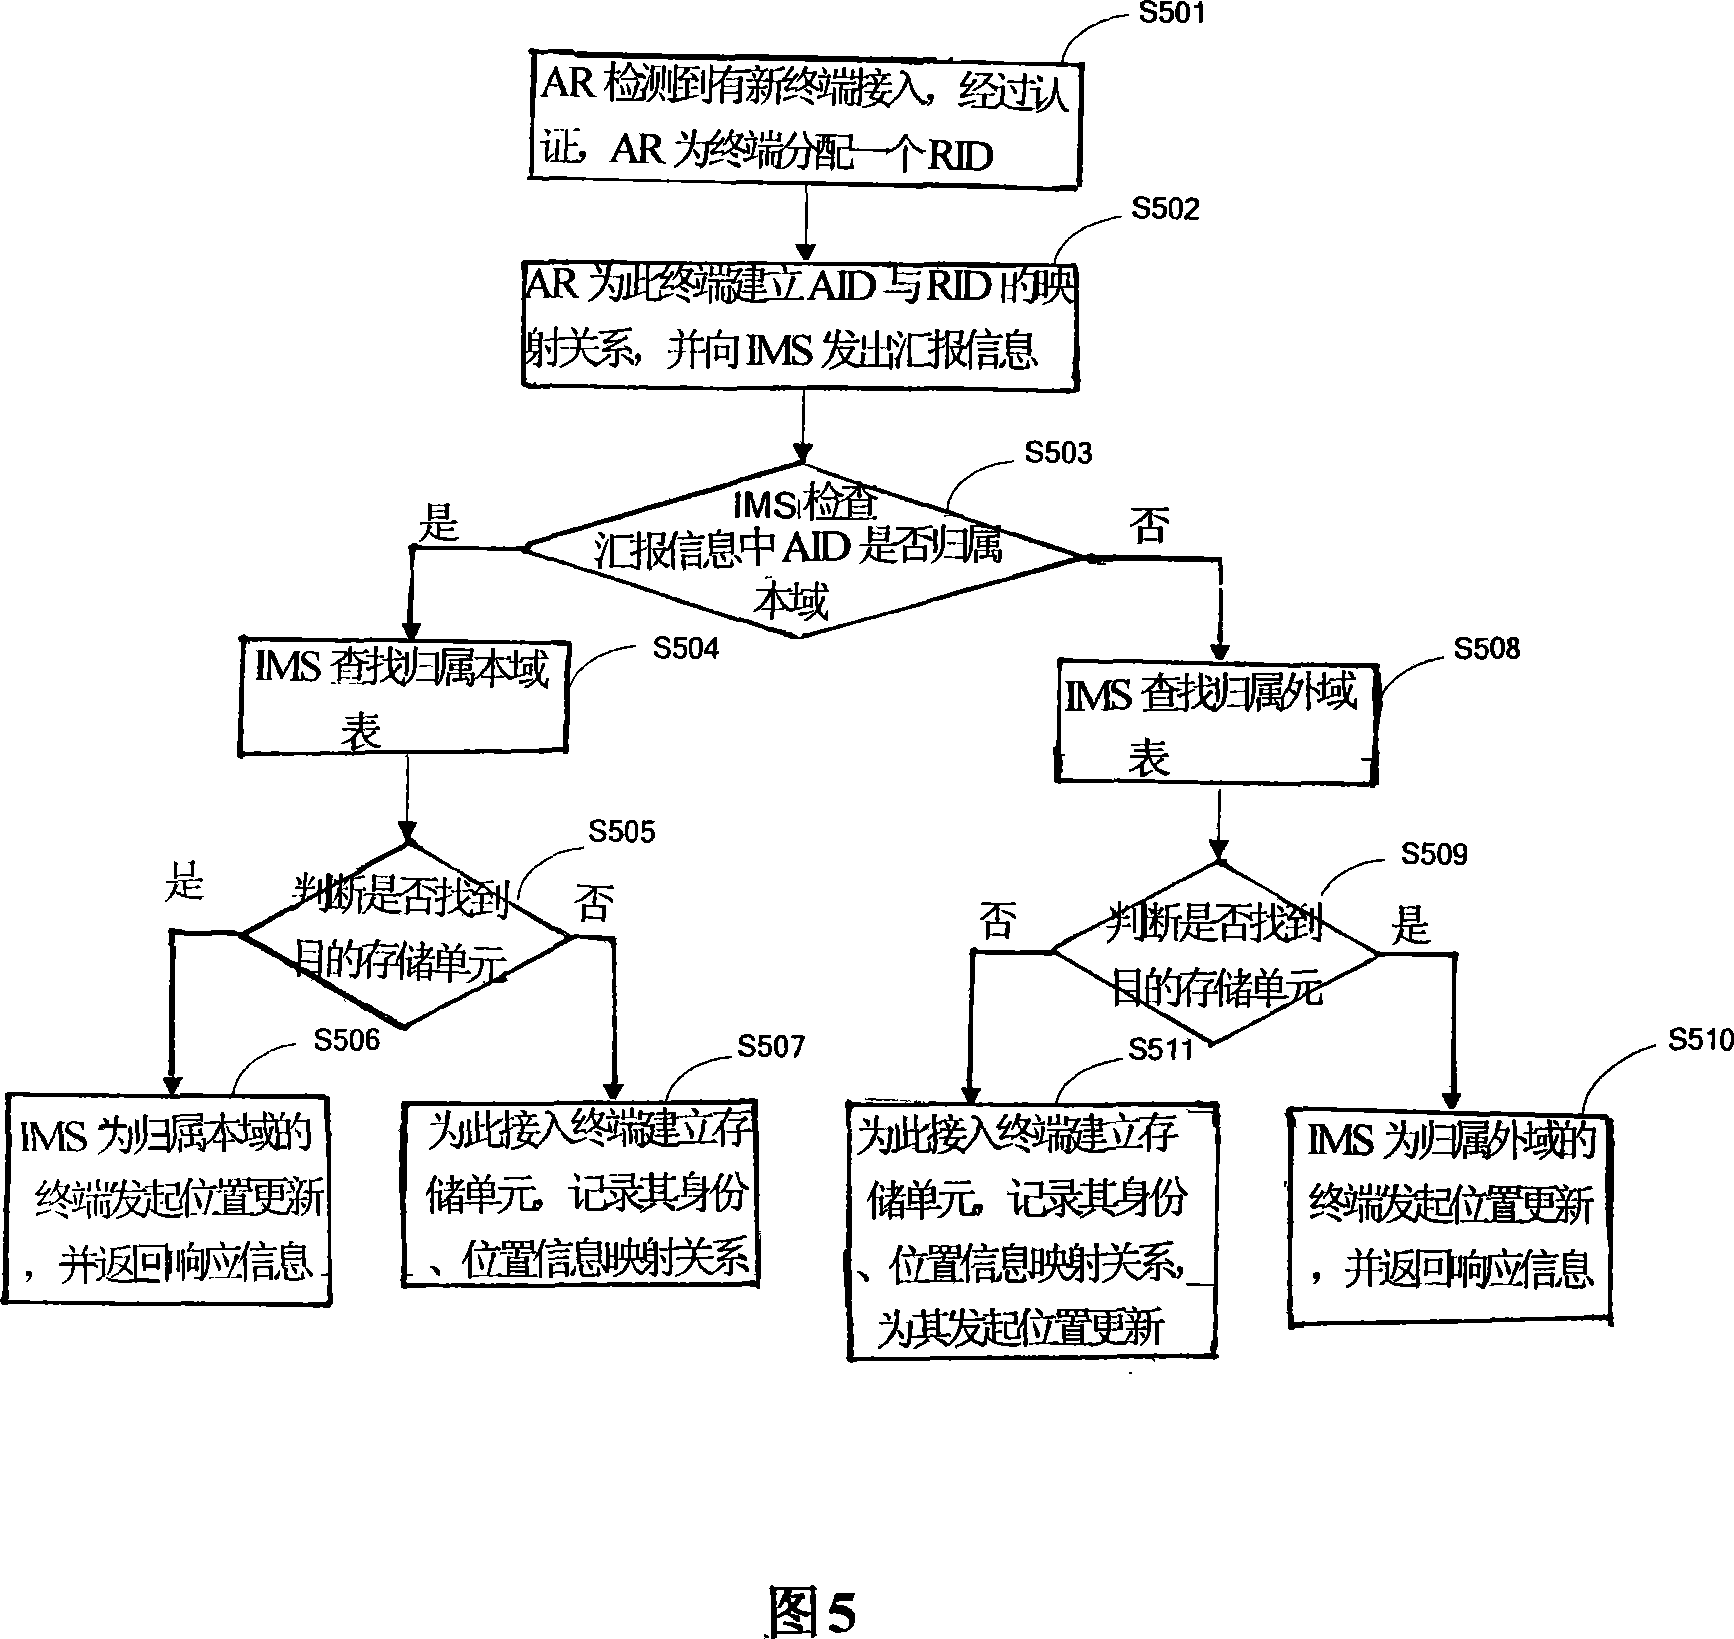 Method for managing integrated network locations